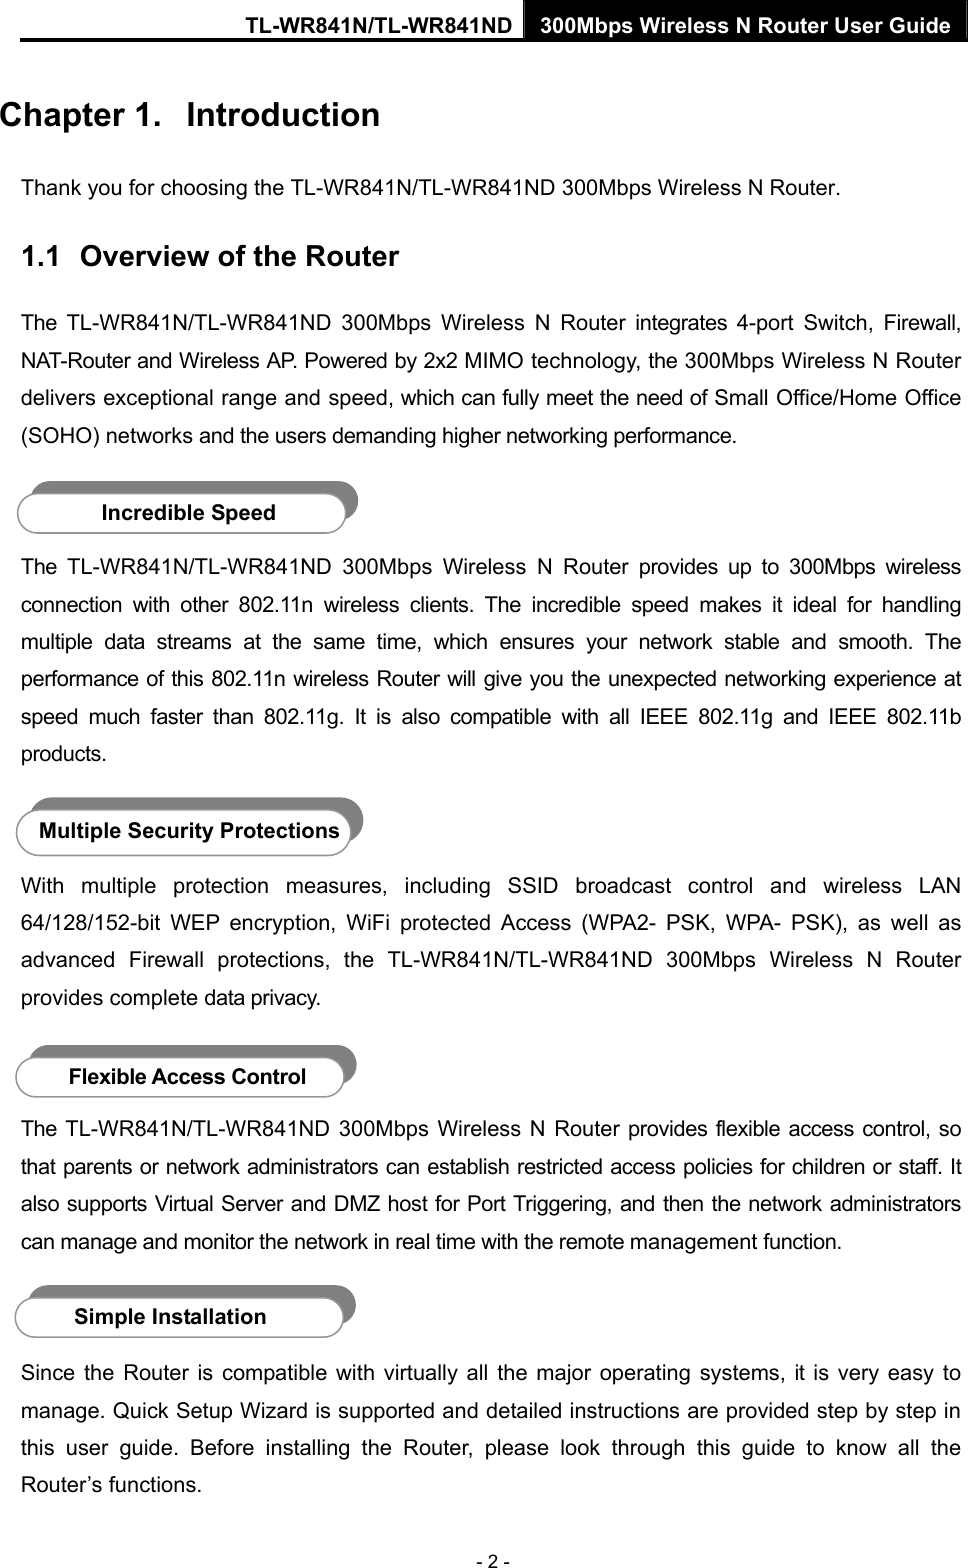 TL-WR841N/TL-WR841ND 300Mbps Wireless N Router User Guide - 2 - Chapter 1.  Introduction Thank you for choosing the TL-WR841N/TL-WR841ND 300Mbps Wireless N Router. 1.1  Overview of the Router The TL-WR841N/TL-WR841ND 300Mbps Wireless N Router integrates 4-port Switch, Firewall, NAT-Router and Wireless AP. Powered by 2x2 MIMO technology, the 300Mbps Wireless N Router delivers exceptional range and speed, which can fully meet the need of Small Office/Home Office (SOHO) networks and the users demanding higher networking performance.  The TL-WR841N/TL-WR841ND 300Mbps Wireless N Router provides up to 300Mbps wireless connection with other 802.11n wireless clients. The incredible speed makes it ideal for handling multiple data streams at the same time, which ensures your network stable and smooth. The performance of this 802.11n wireless Router will give you the unexpected networking experience at speed much faster than 802.11g. It is also compatible with all IEEE 802.11g and IEEE 802.11b products.  With multiple protection measures, including SSID broadcast control and wireless LAN 64/128/152-bit WEP encryption, WiFi protected Access (WPA2- PSK, WPA- PSK), as well as advanced Firewall protections, the TL-WR841N/TL-WR841ND 300Mbps Wireless N Router provides complete data privacy.    The TL-WR841N/TL-WR841ND 300Mbps Wireless N Router provides flexible access control, so that parents or network administrators can establish restricted access policies for children or staff. It also supports Virtual Server and DMZ host for Port Triggering, and then the network administrators can manage and monitor the network in real time with the remote management function.    Since the Router is compatible with virtually all the major operating systems, it is very easy to manage. Quick Setup Wizard is supported and detailed instructions are provided step by step in this user guide. Before installing the Router, please look through this guide to know all the Router’s functions. Incredible Speed Multiple Security Protections Flexible Access Control Simple Installation 